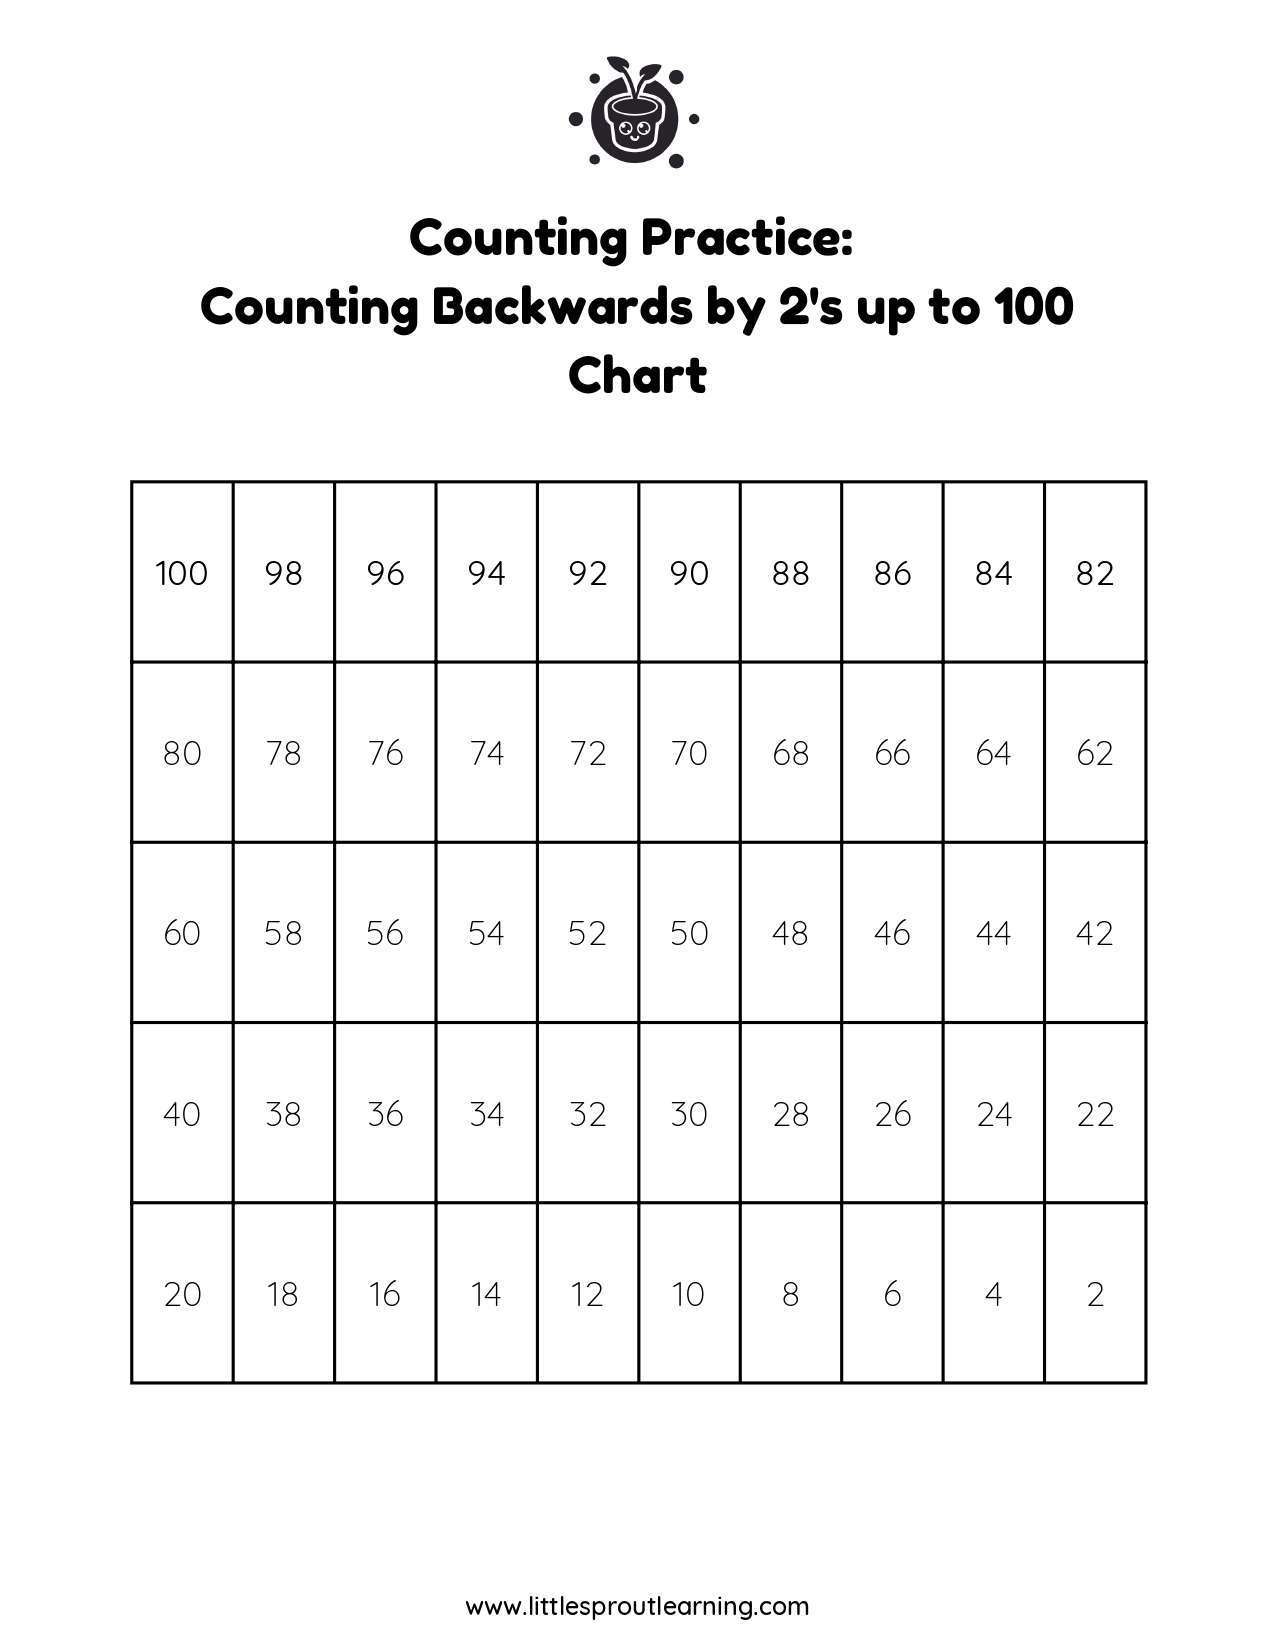 Counting Backwards by 2’s From 100 Full chart